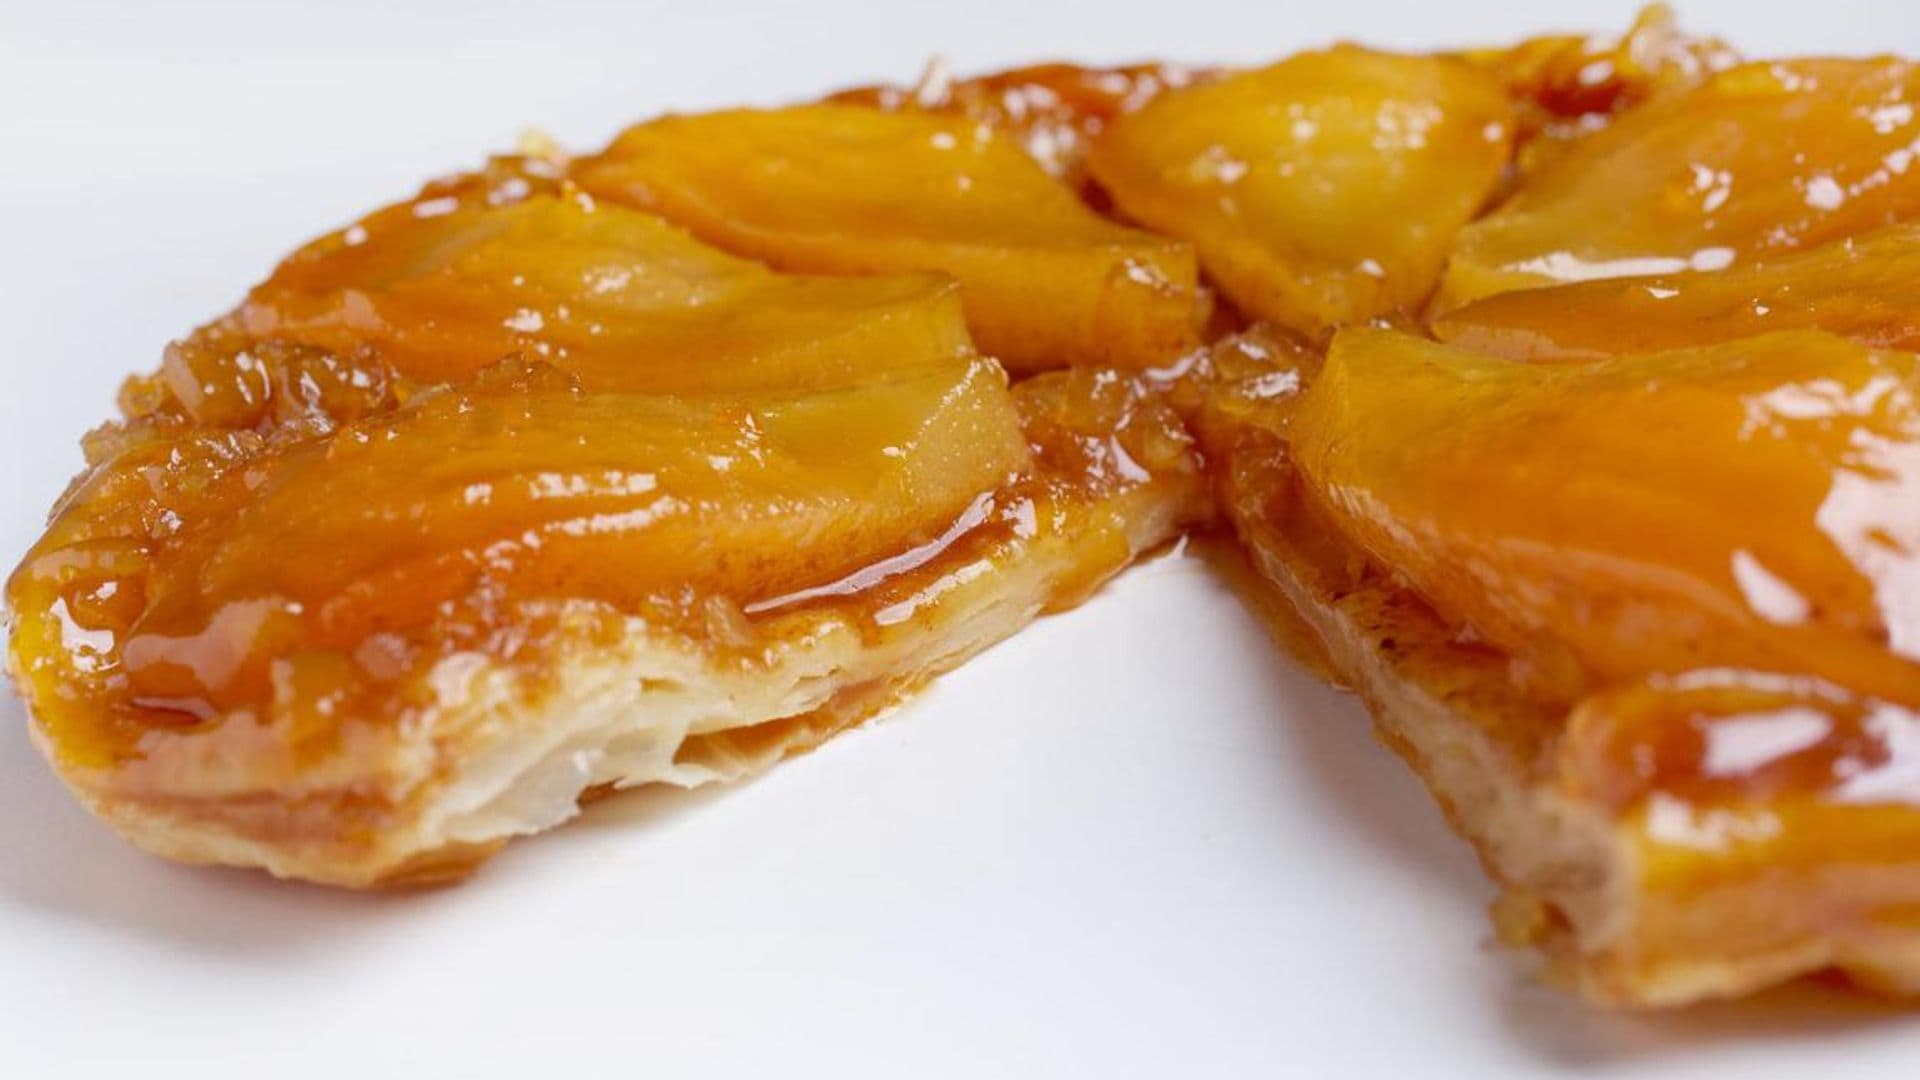 Impress guests at your next gathering with an easy and delicious homemade apple tart recipe